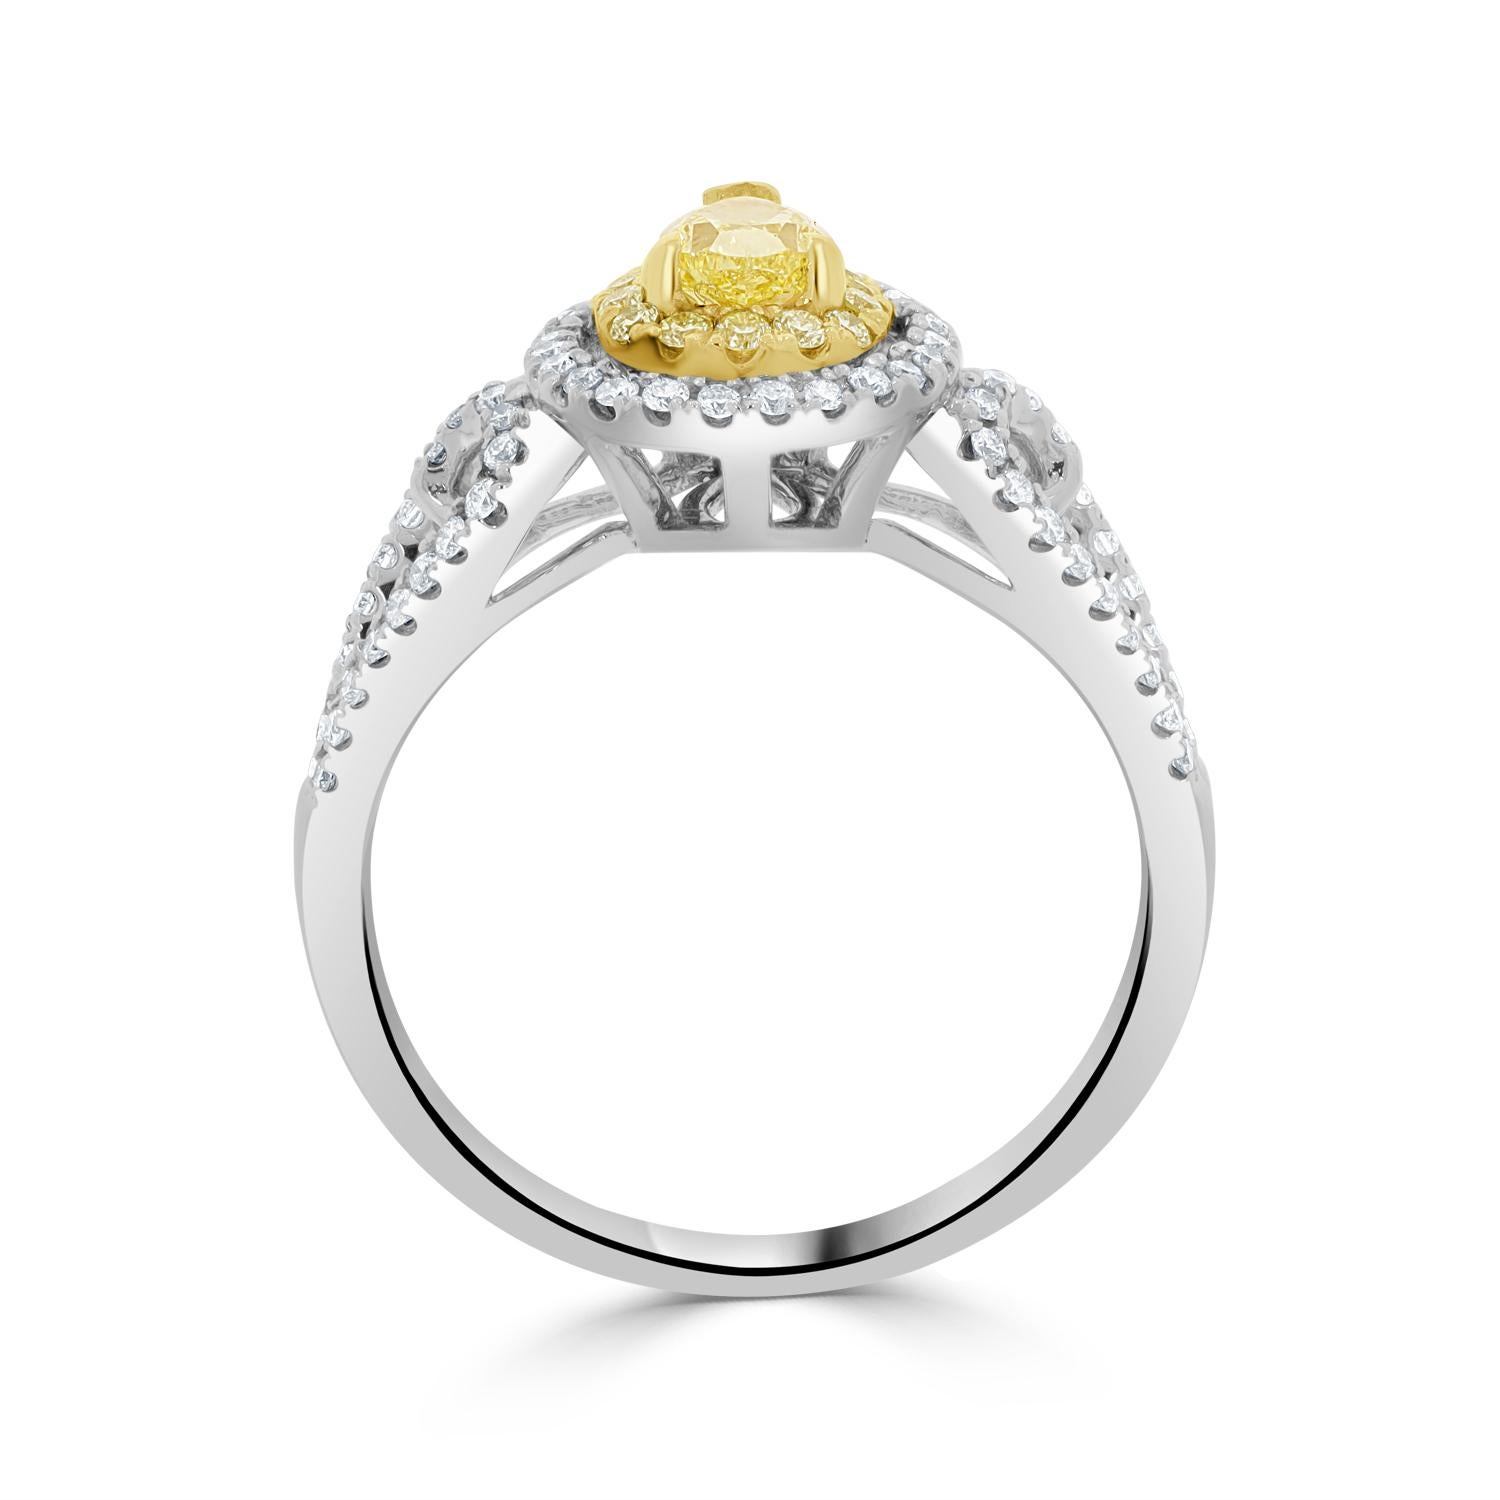 World-class artfulness and modern design come together in this ring. This ring is finely crafted of 14K two-tone gold and set with yellow Diamonds for a luxury finish. Surrounded by white Diamonds, the ring adds mesmerizing sparkle to your look.
